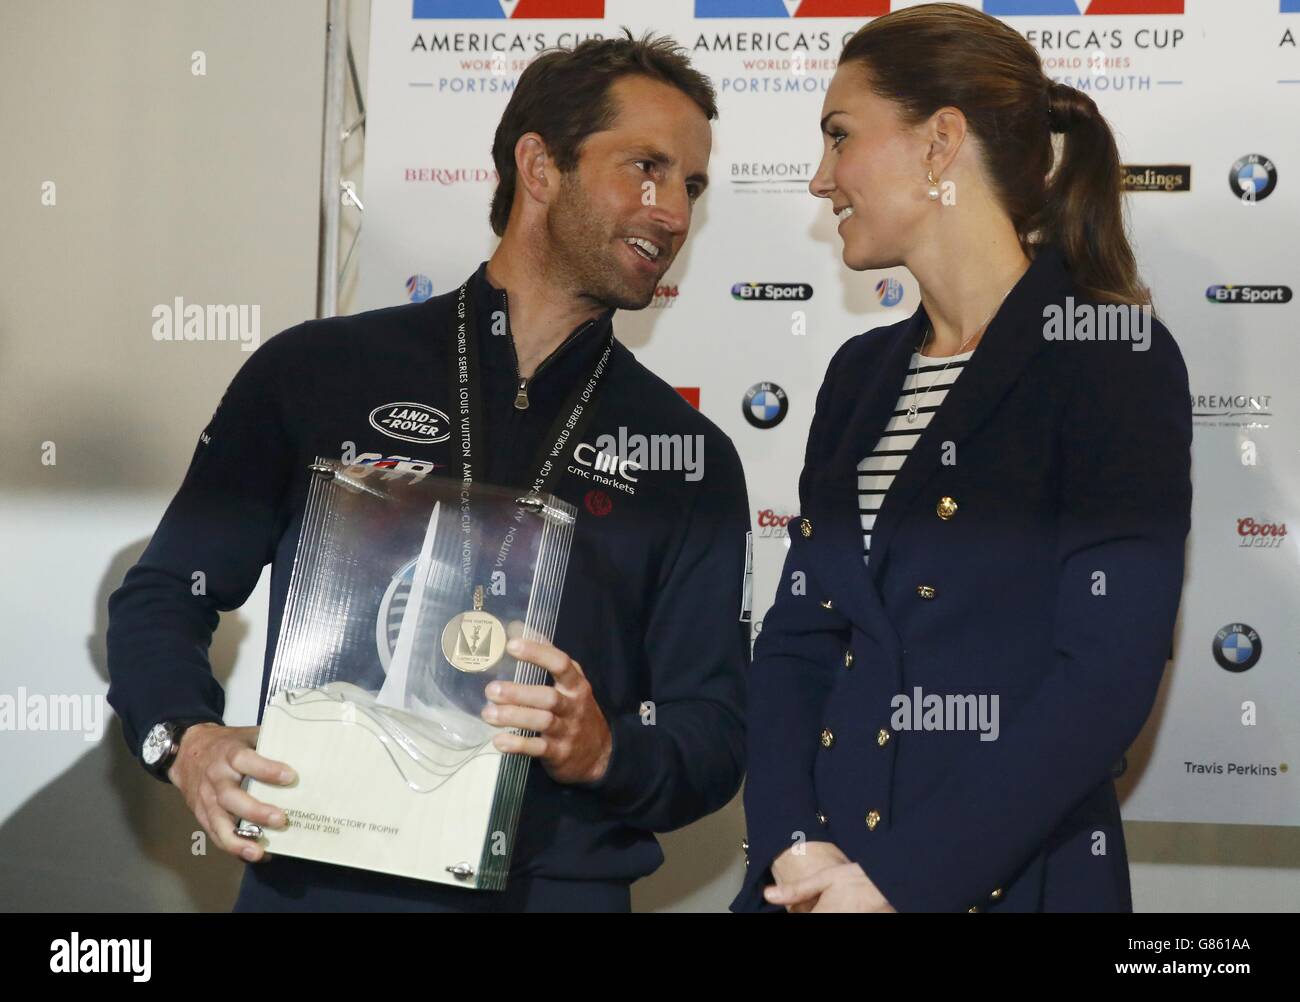 The Duchess of Cambridge presents the Portsmouth Victory Trophy to Ben Ainslie, skipper of Britain's Land Rover backed BAR (Ben Ainslie Racing) team, at the close of the second day of the opening leg of the America's Cup World Series being staged in waters off Portsmouth. Stock Photo